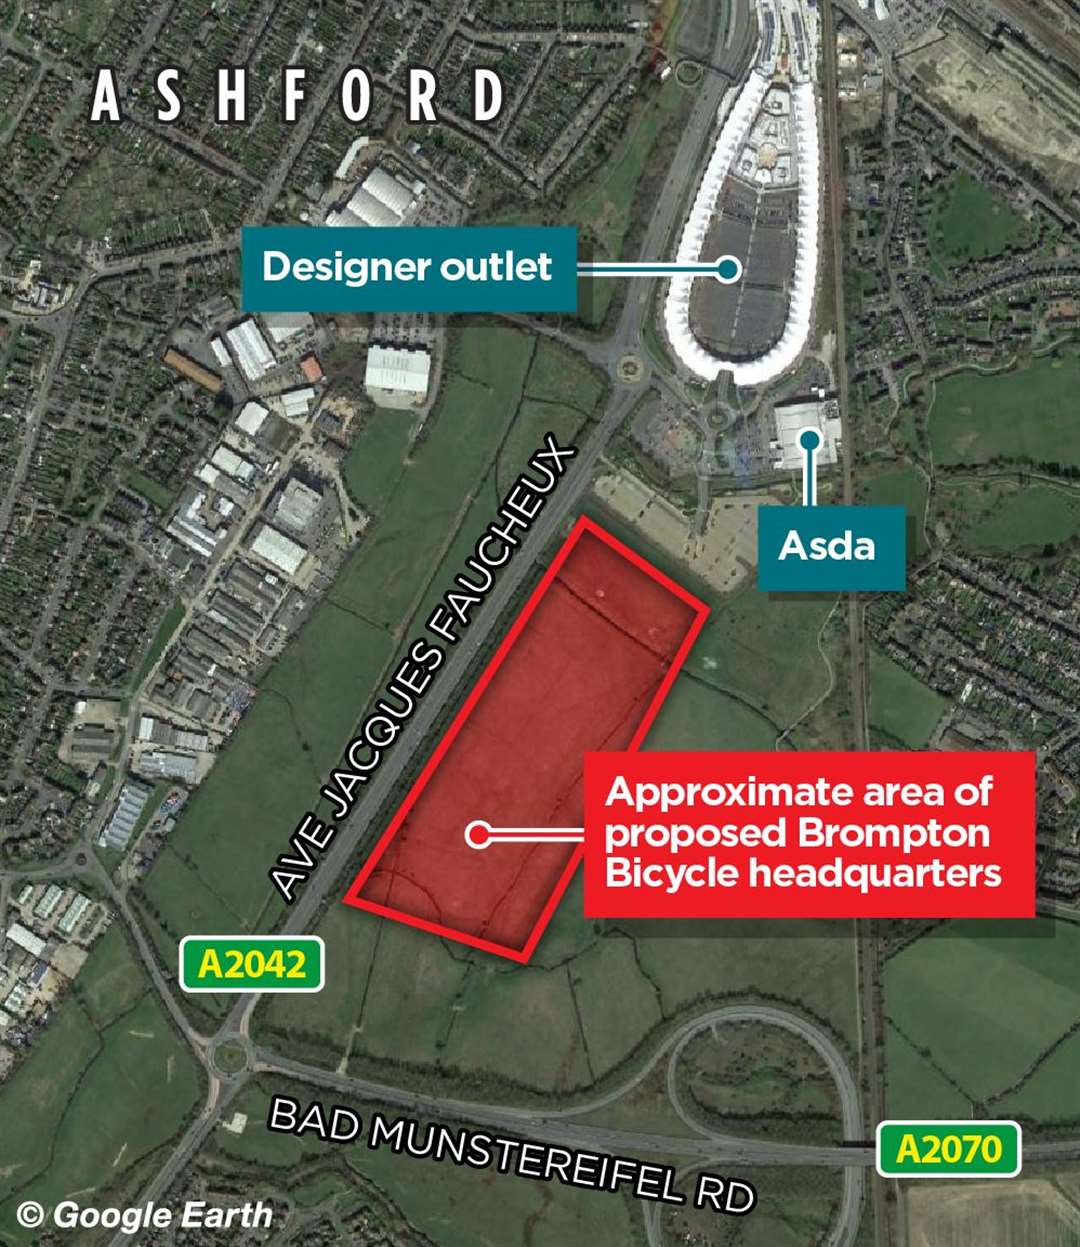 The proposed location for the factory